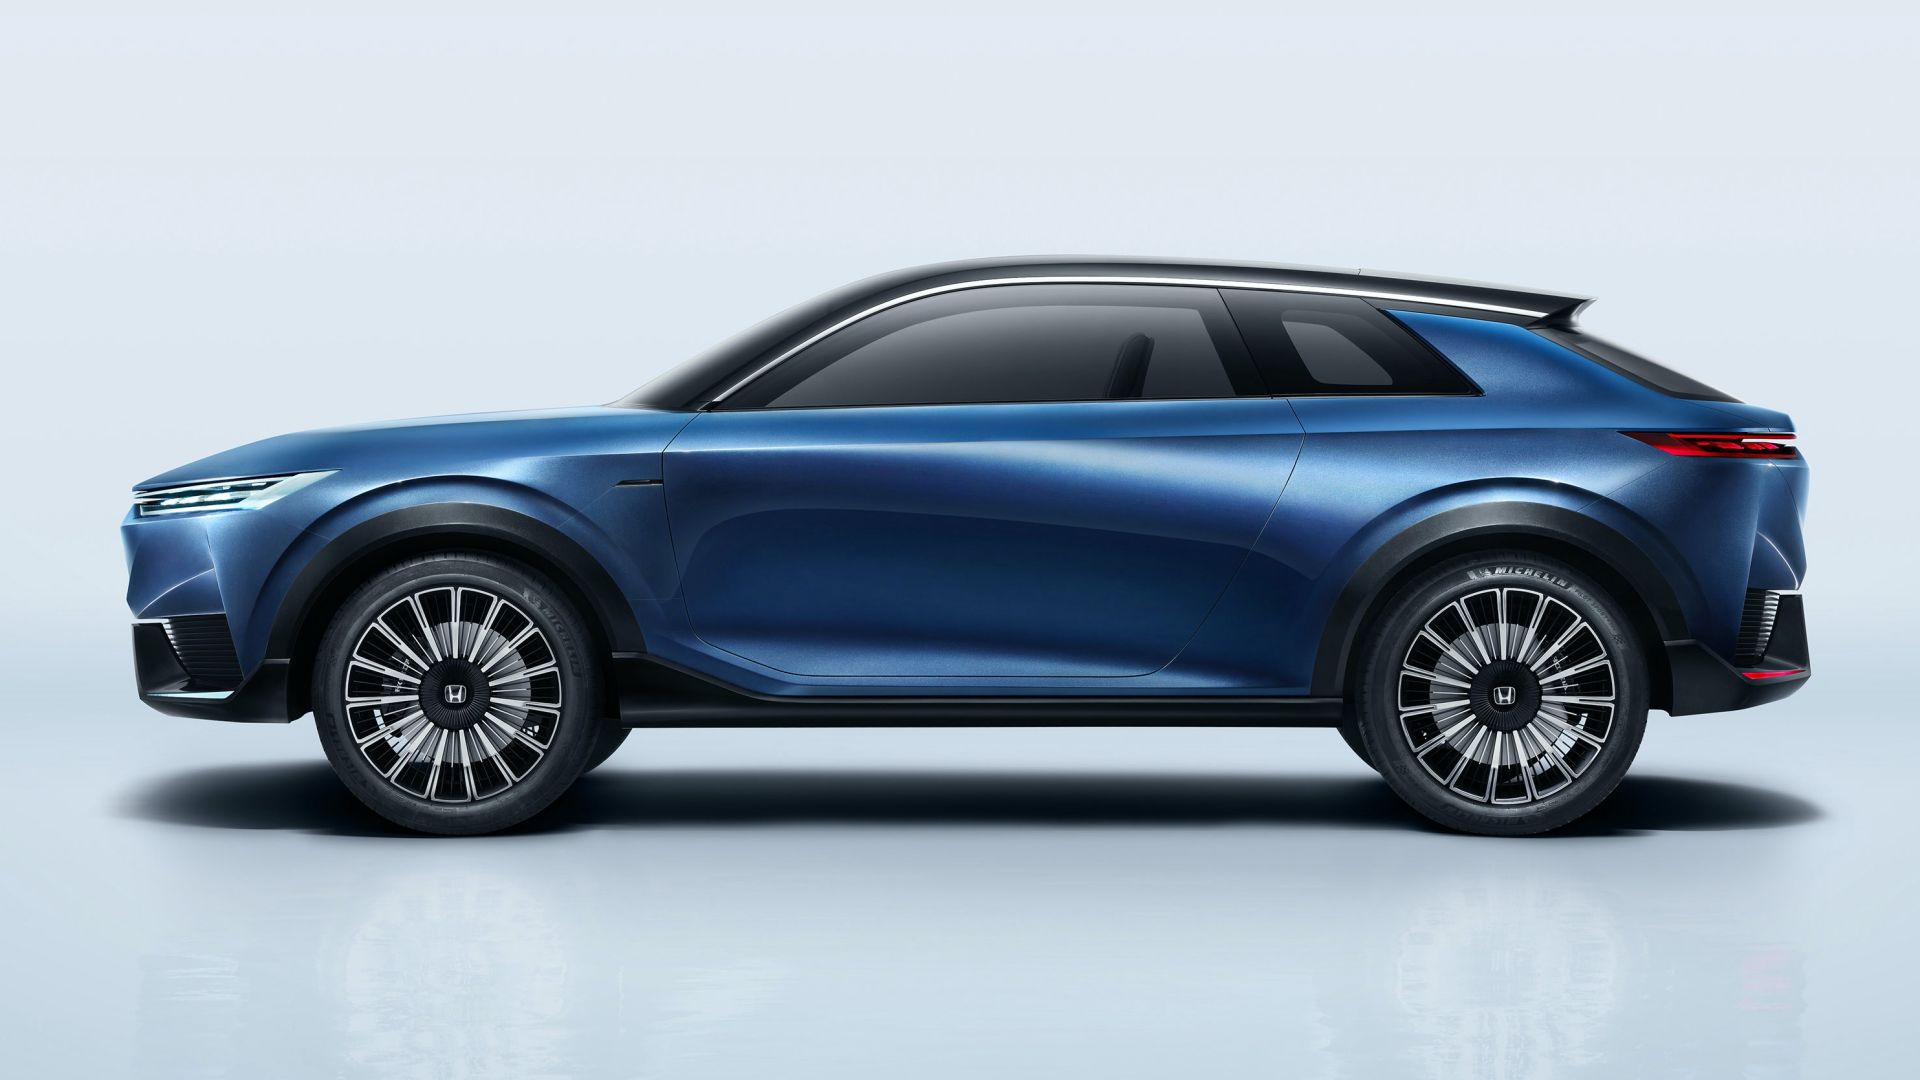 Honda SUV e:concept Is An Enticing Preview Of The Brand's First EV For